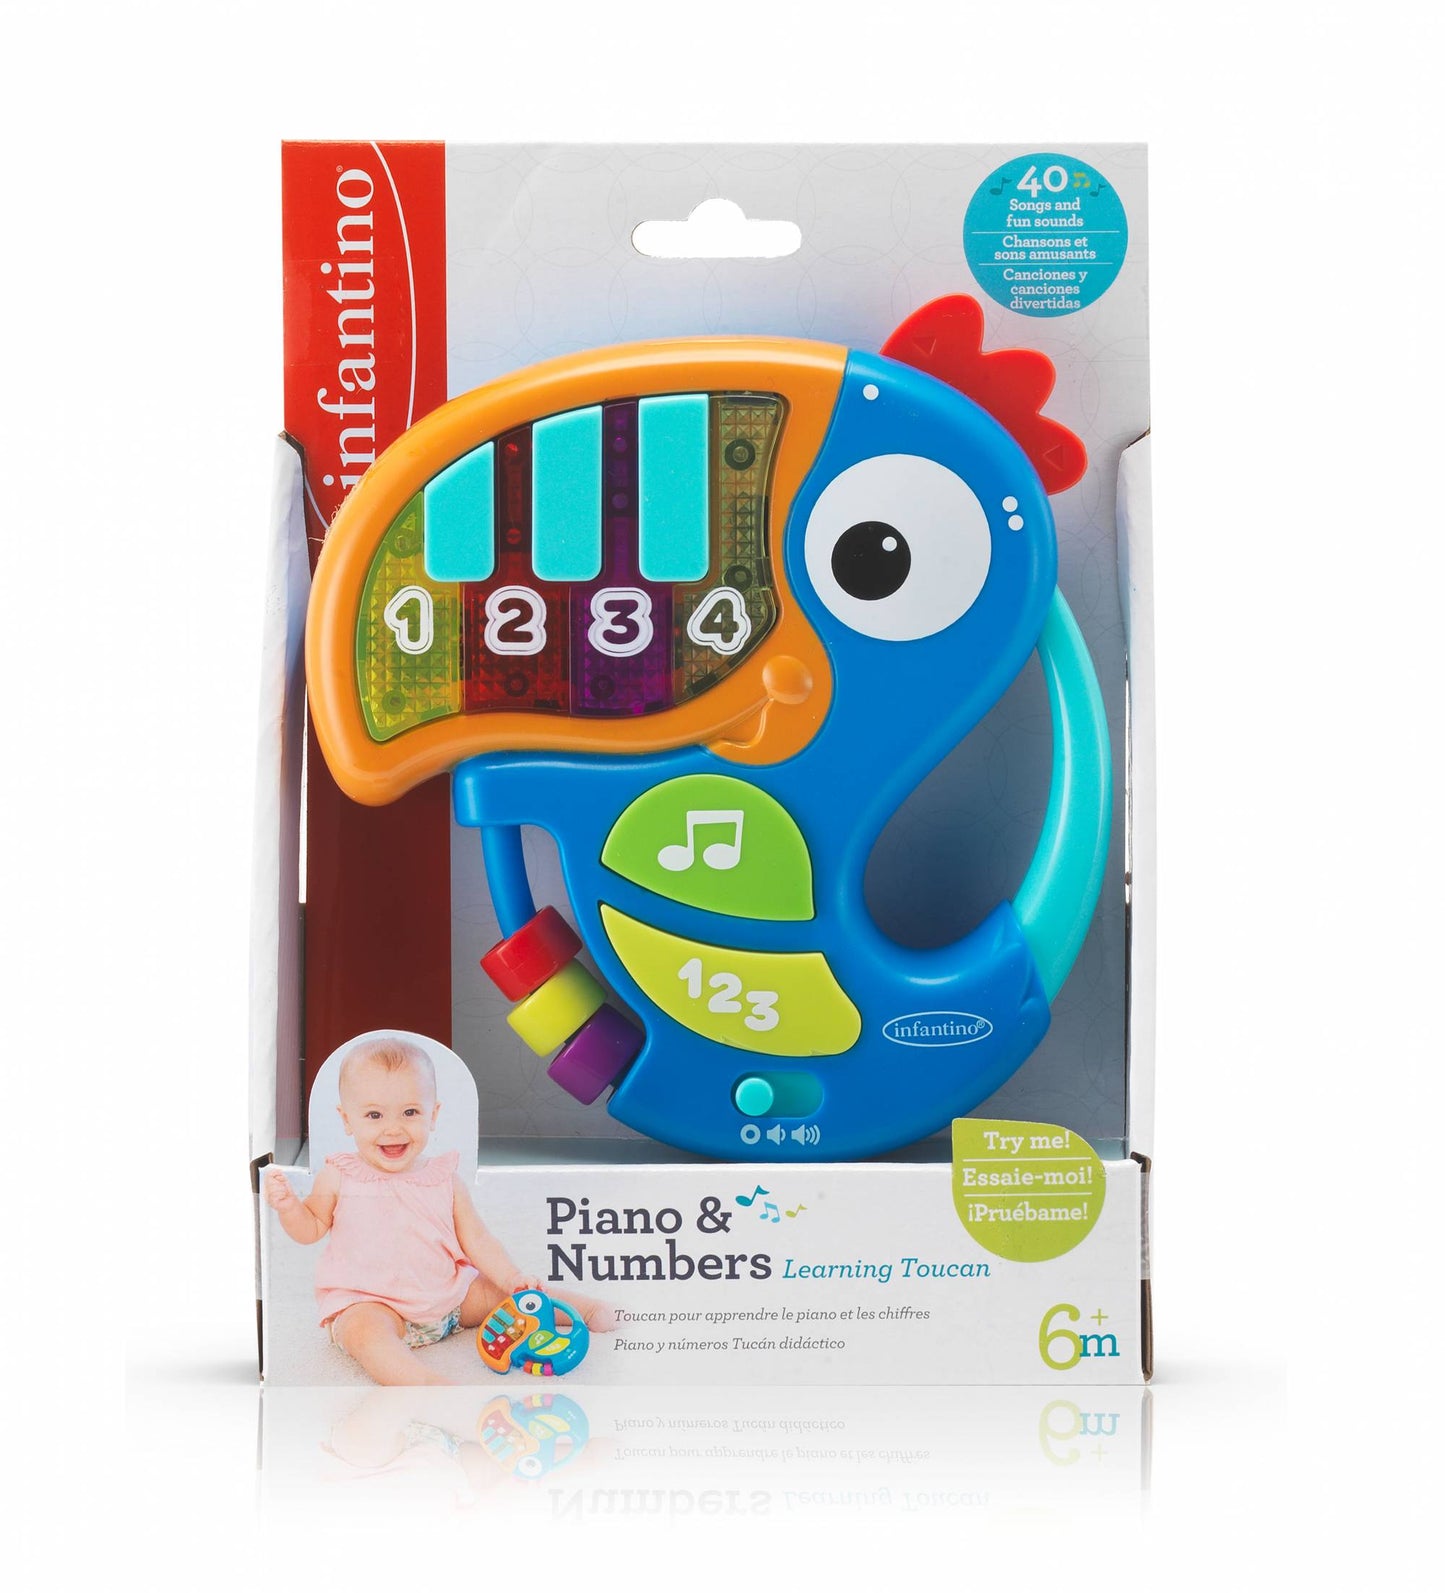 Infantino - Piano & Numbers Learning Toucan